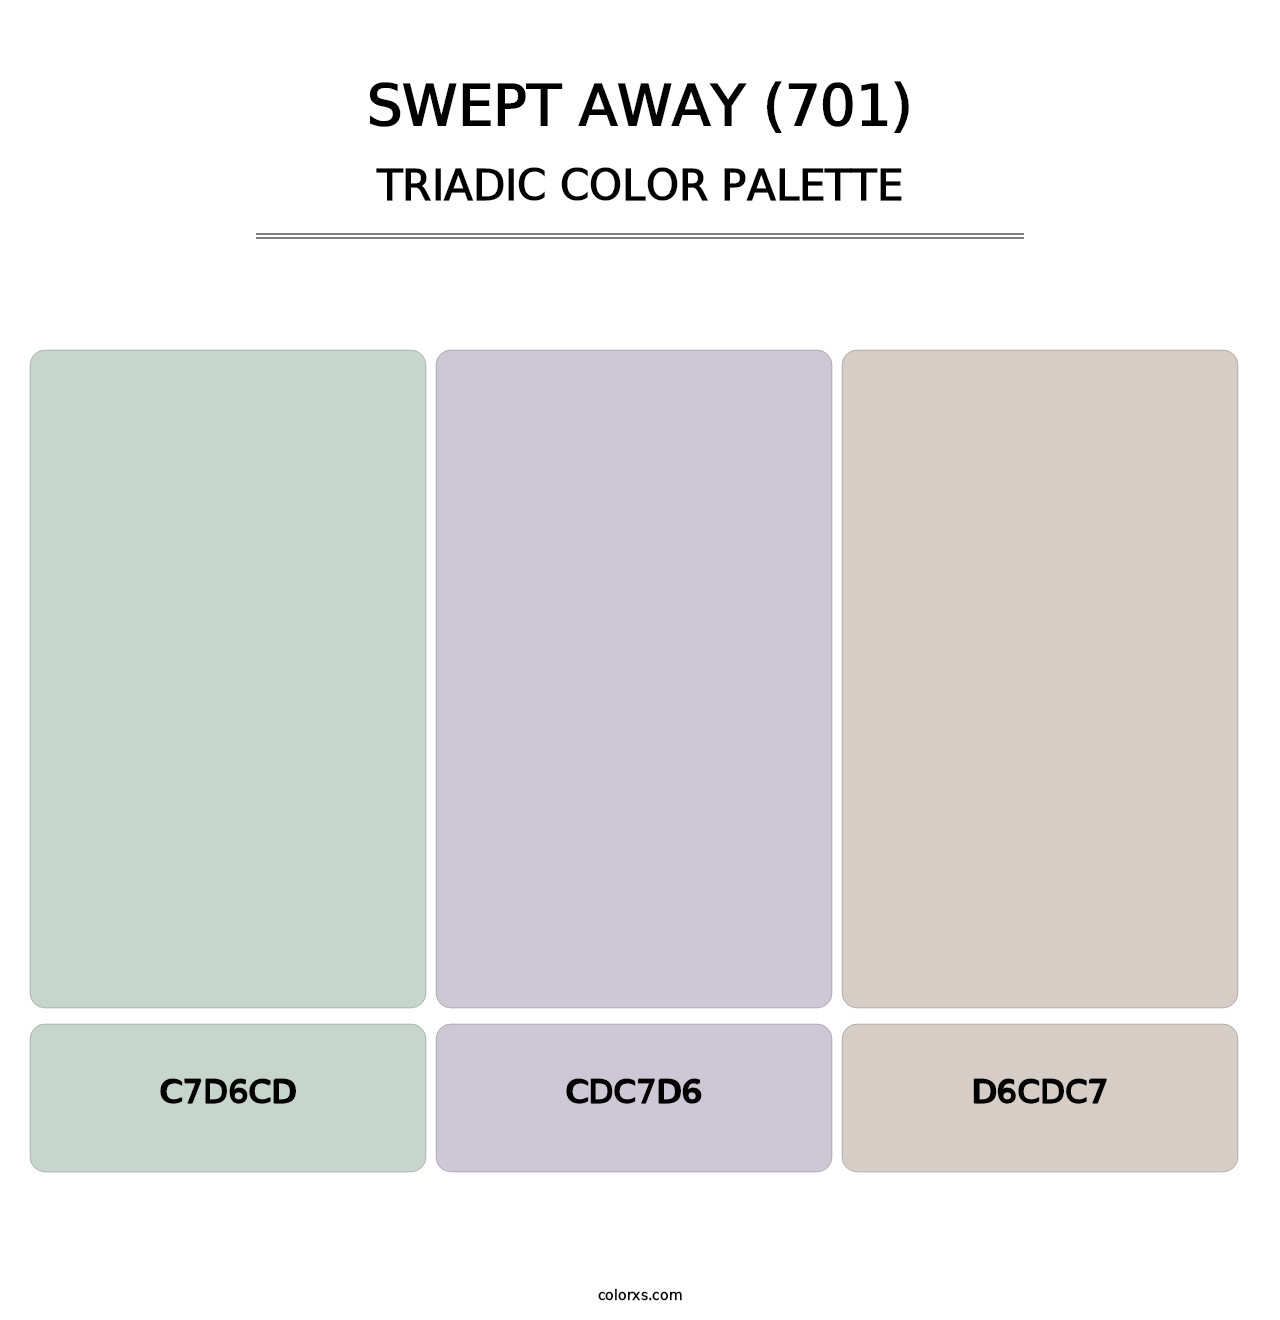 Swept Away (701) - Triadic Color Palette